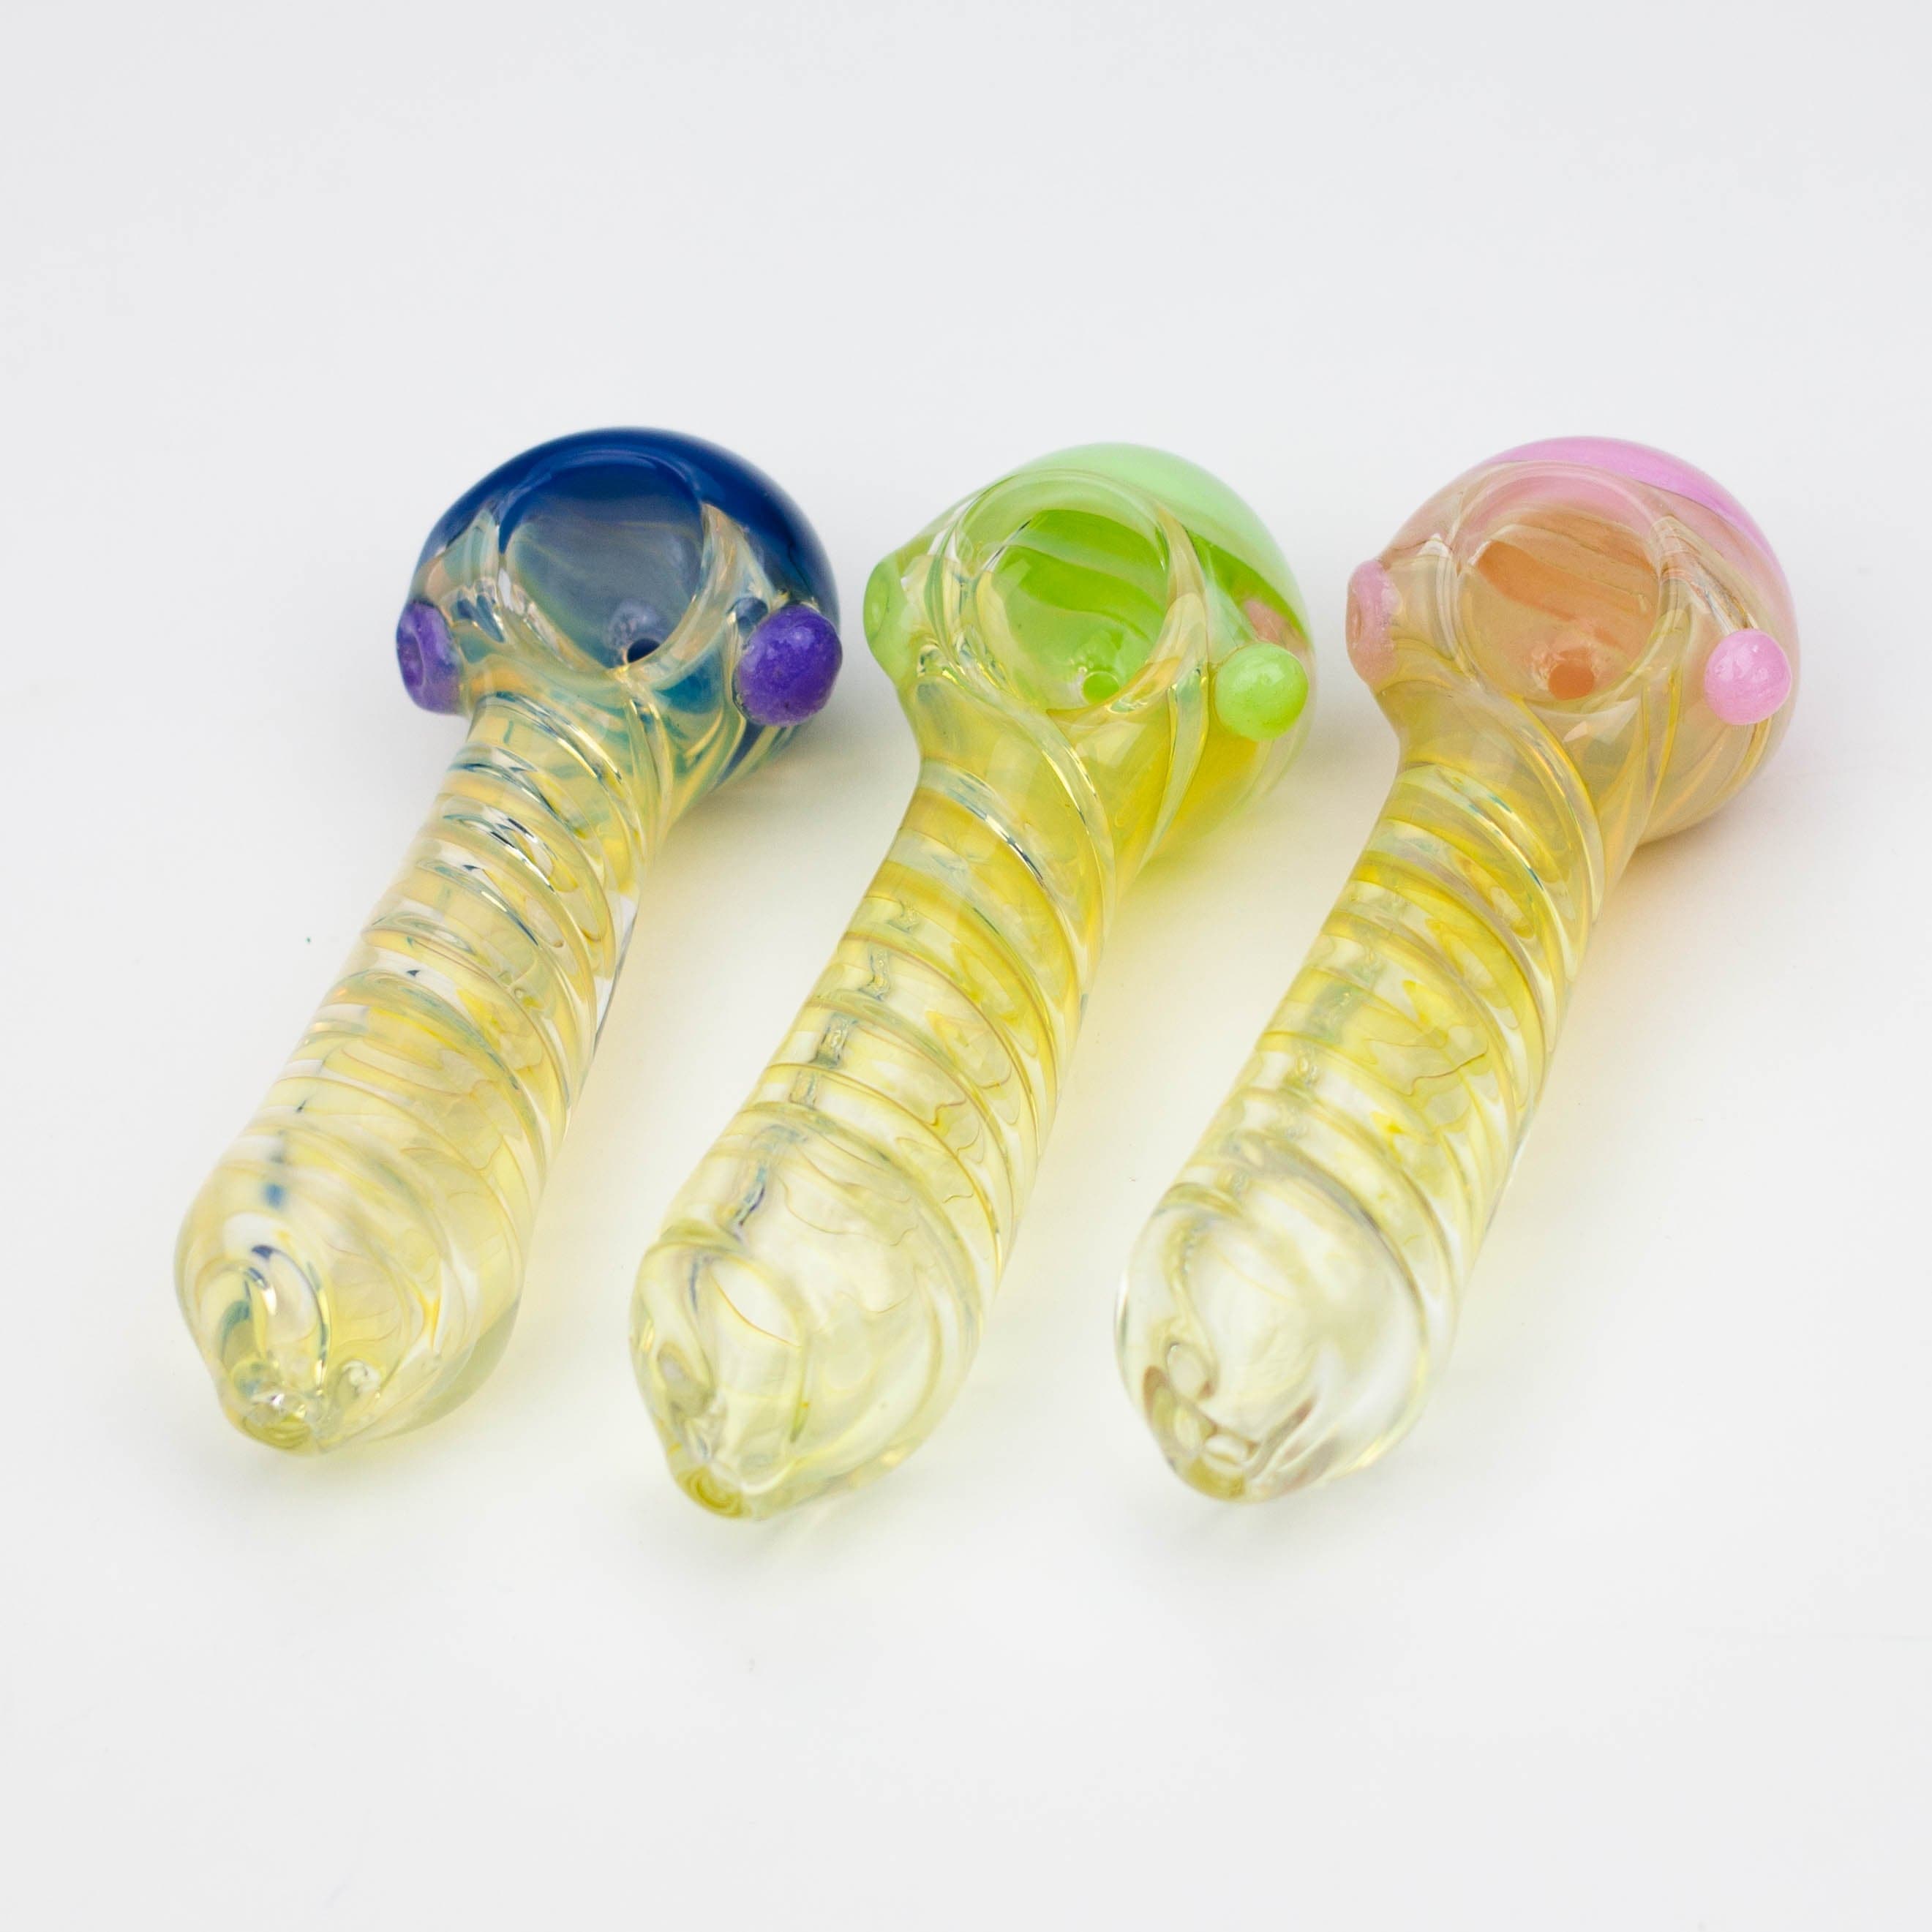 American color twisted soft glass hand pipe 4.5"_0